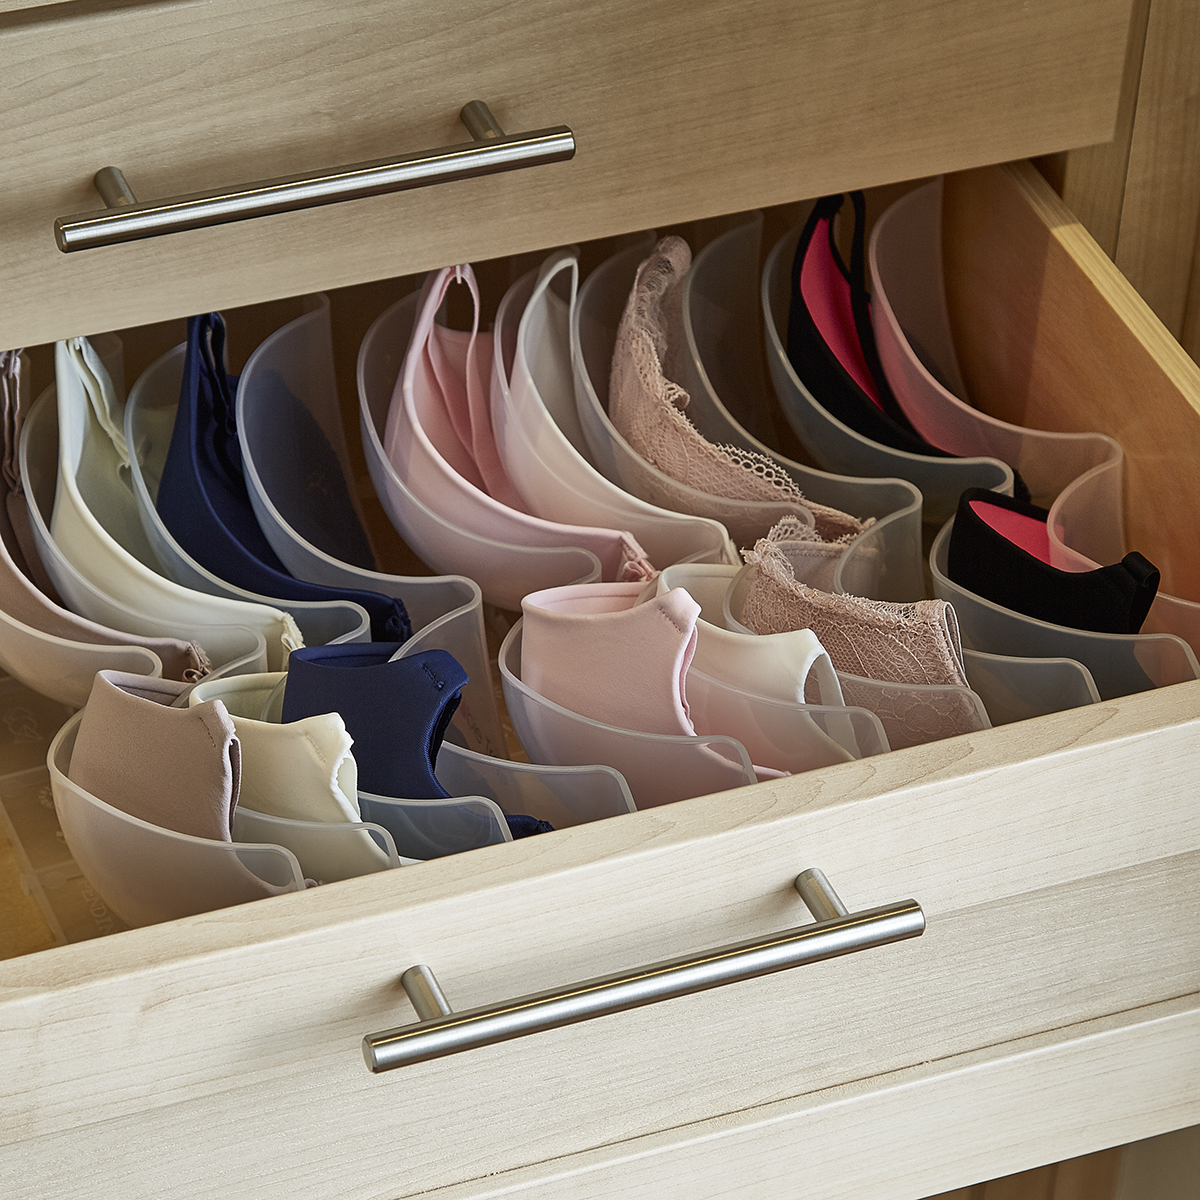 Too Many Bras, So Little Space: My Tips for Organizing Your Lingerie Drawer